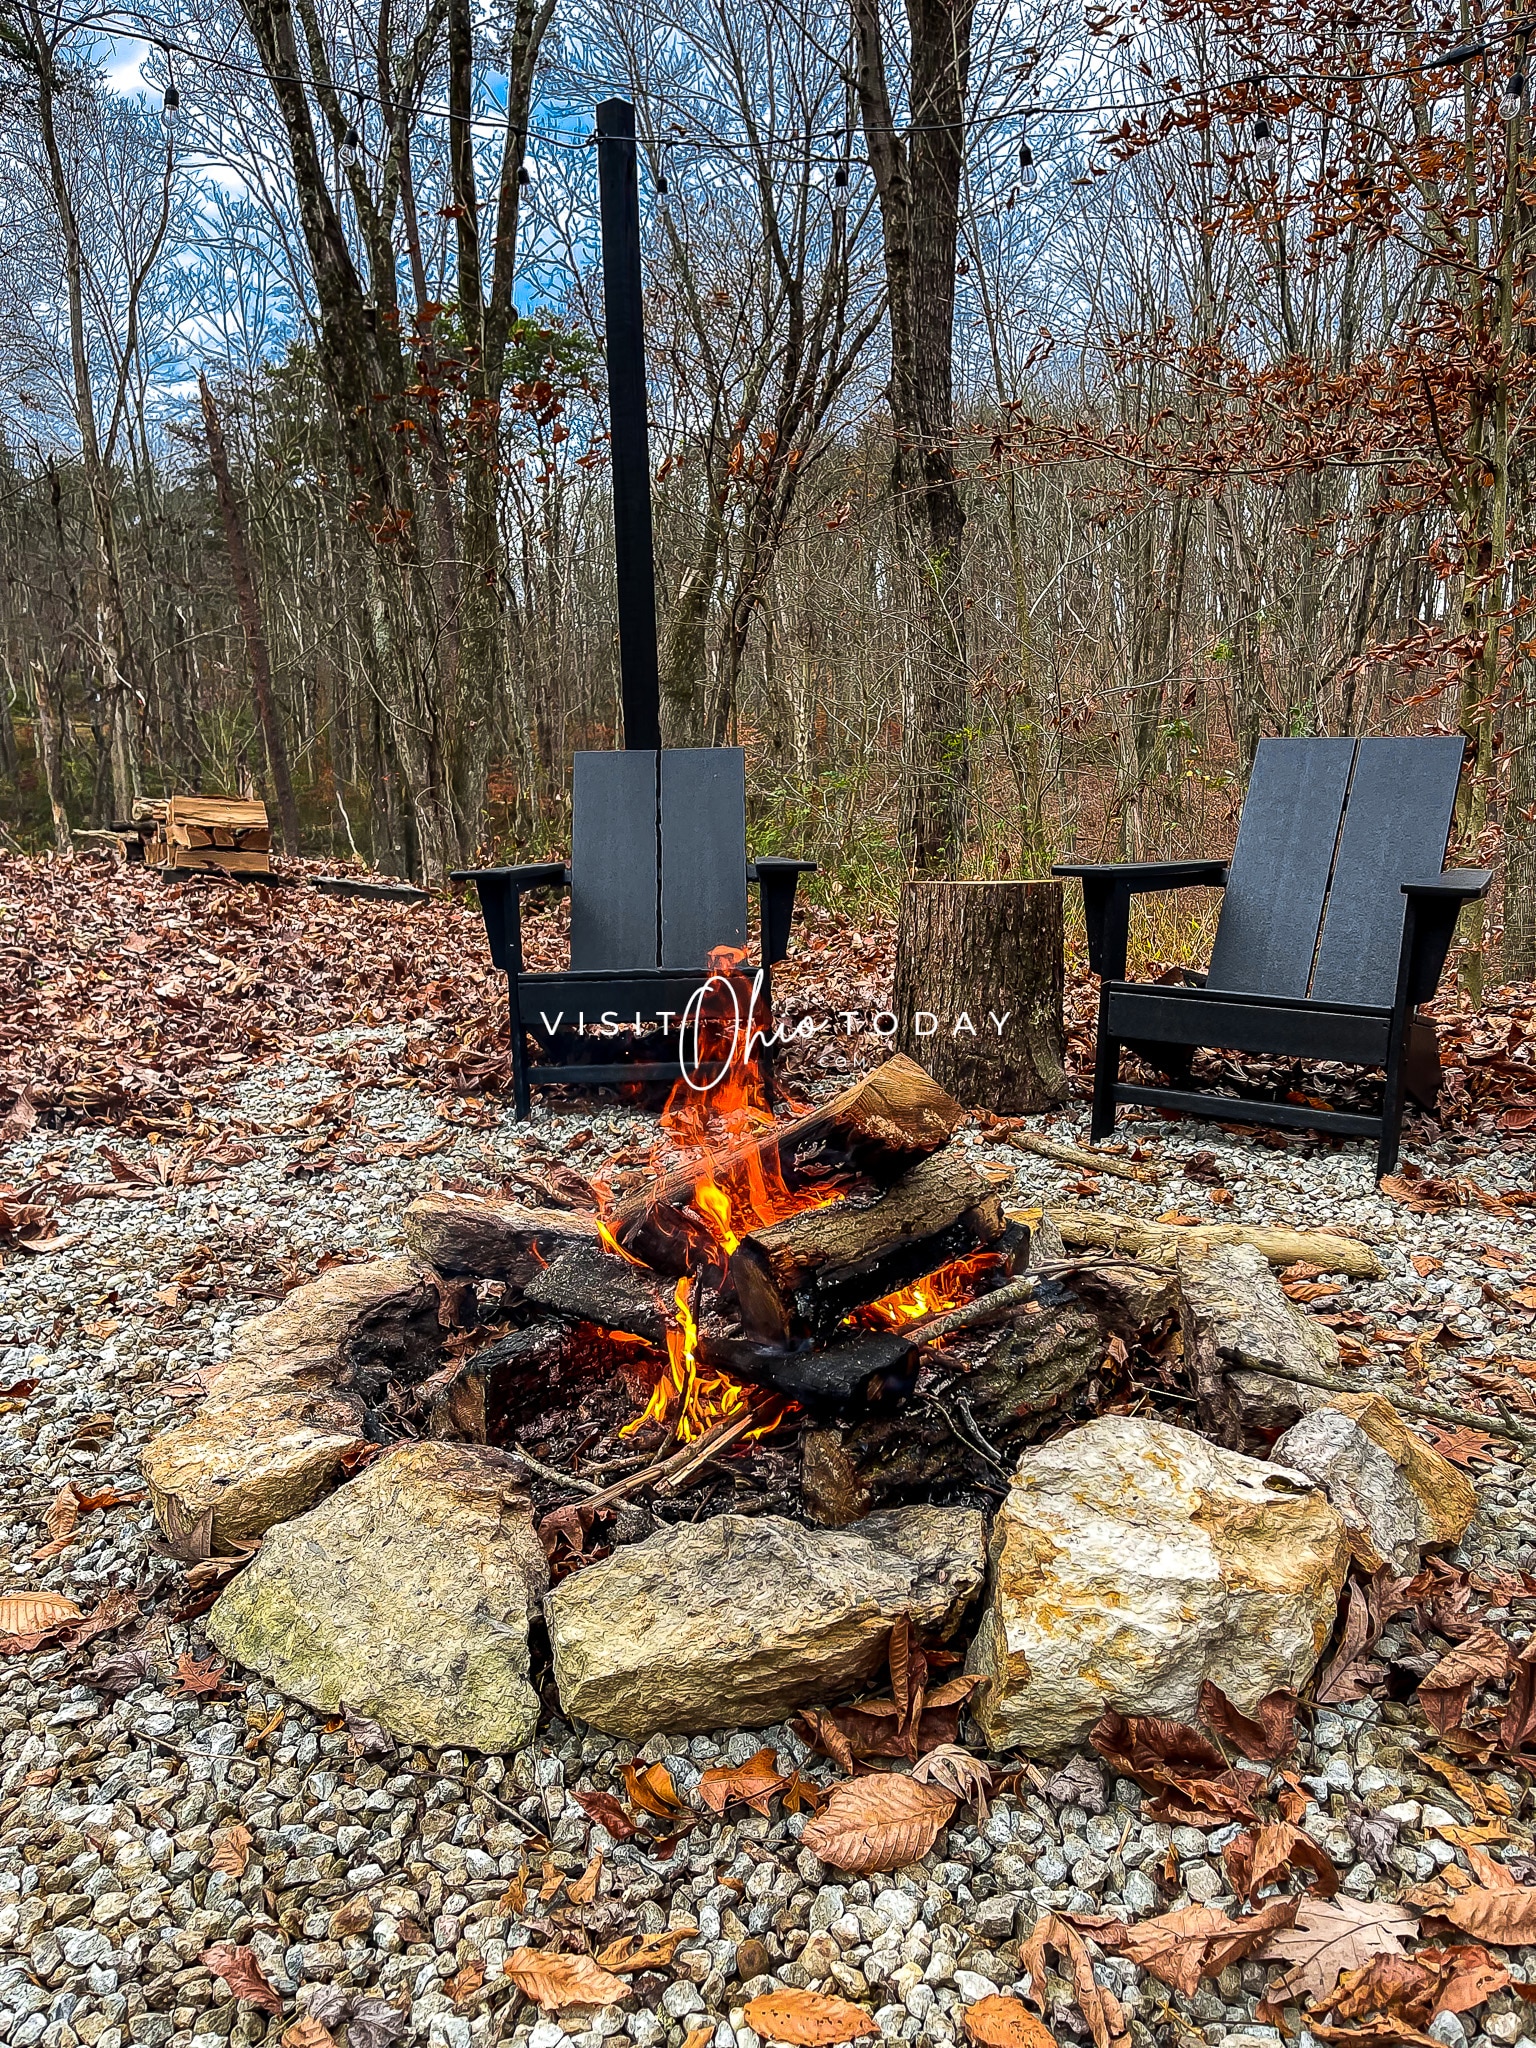 outside in a forest, fire going and two black chairs in background